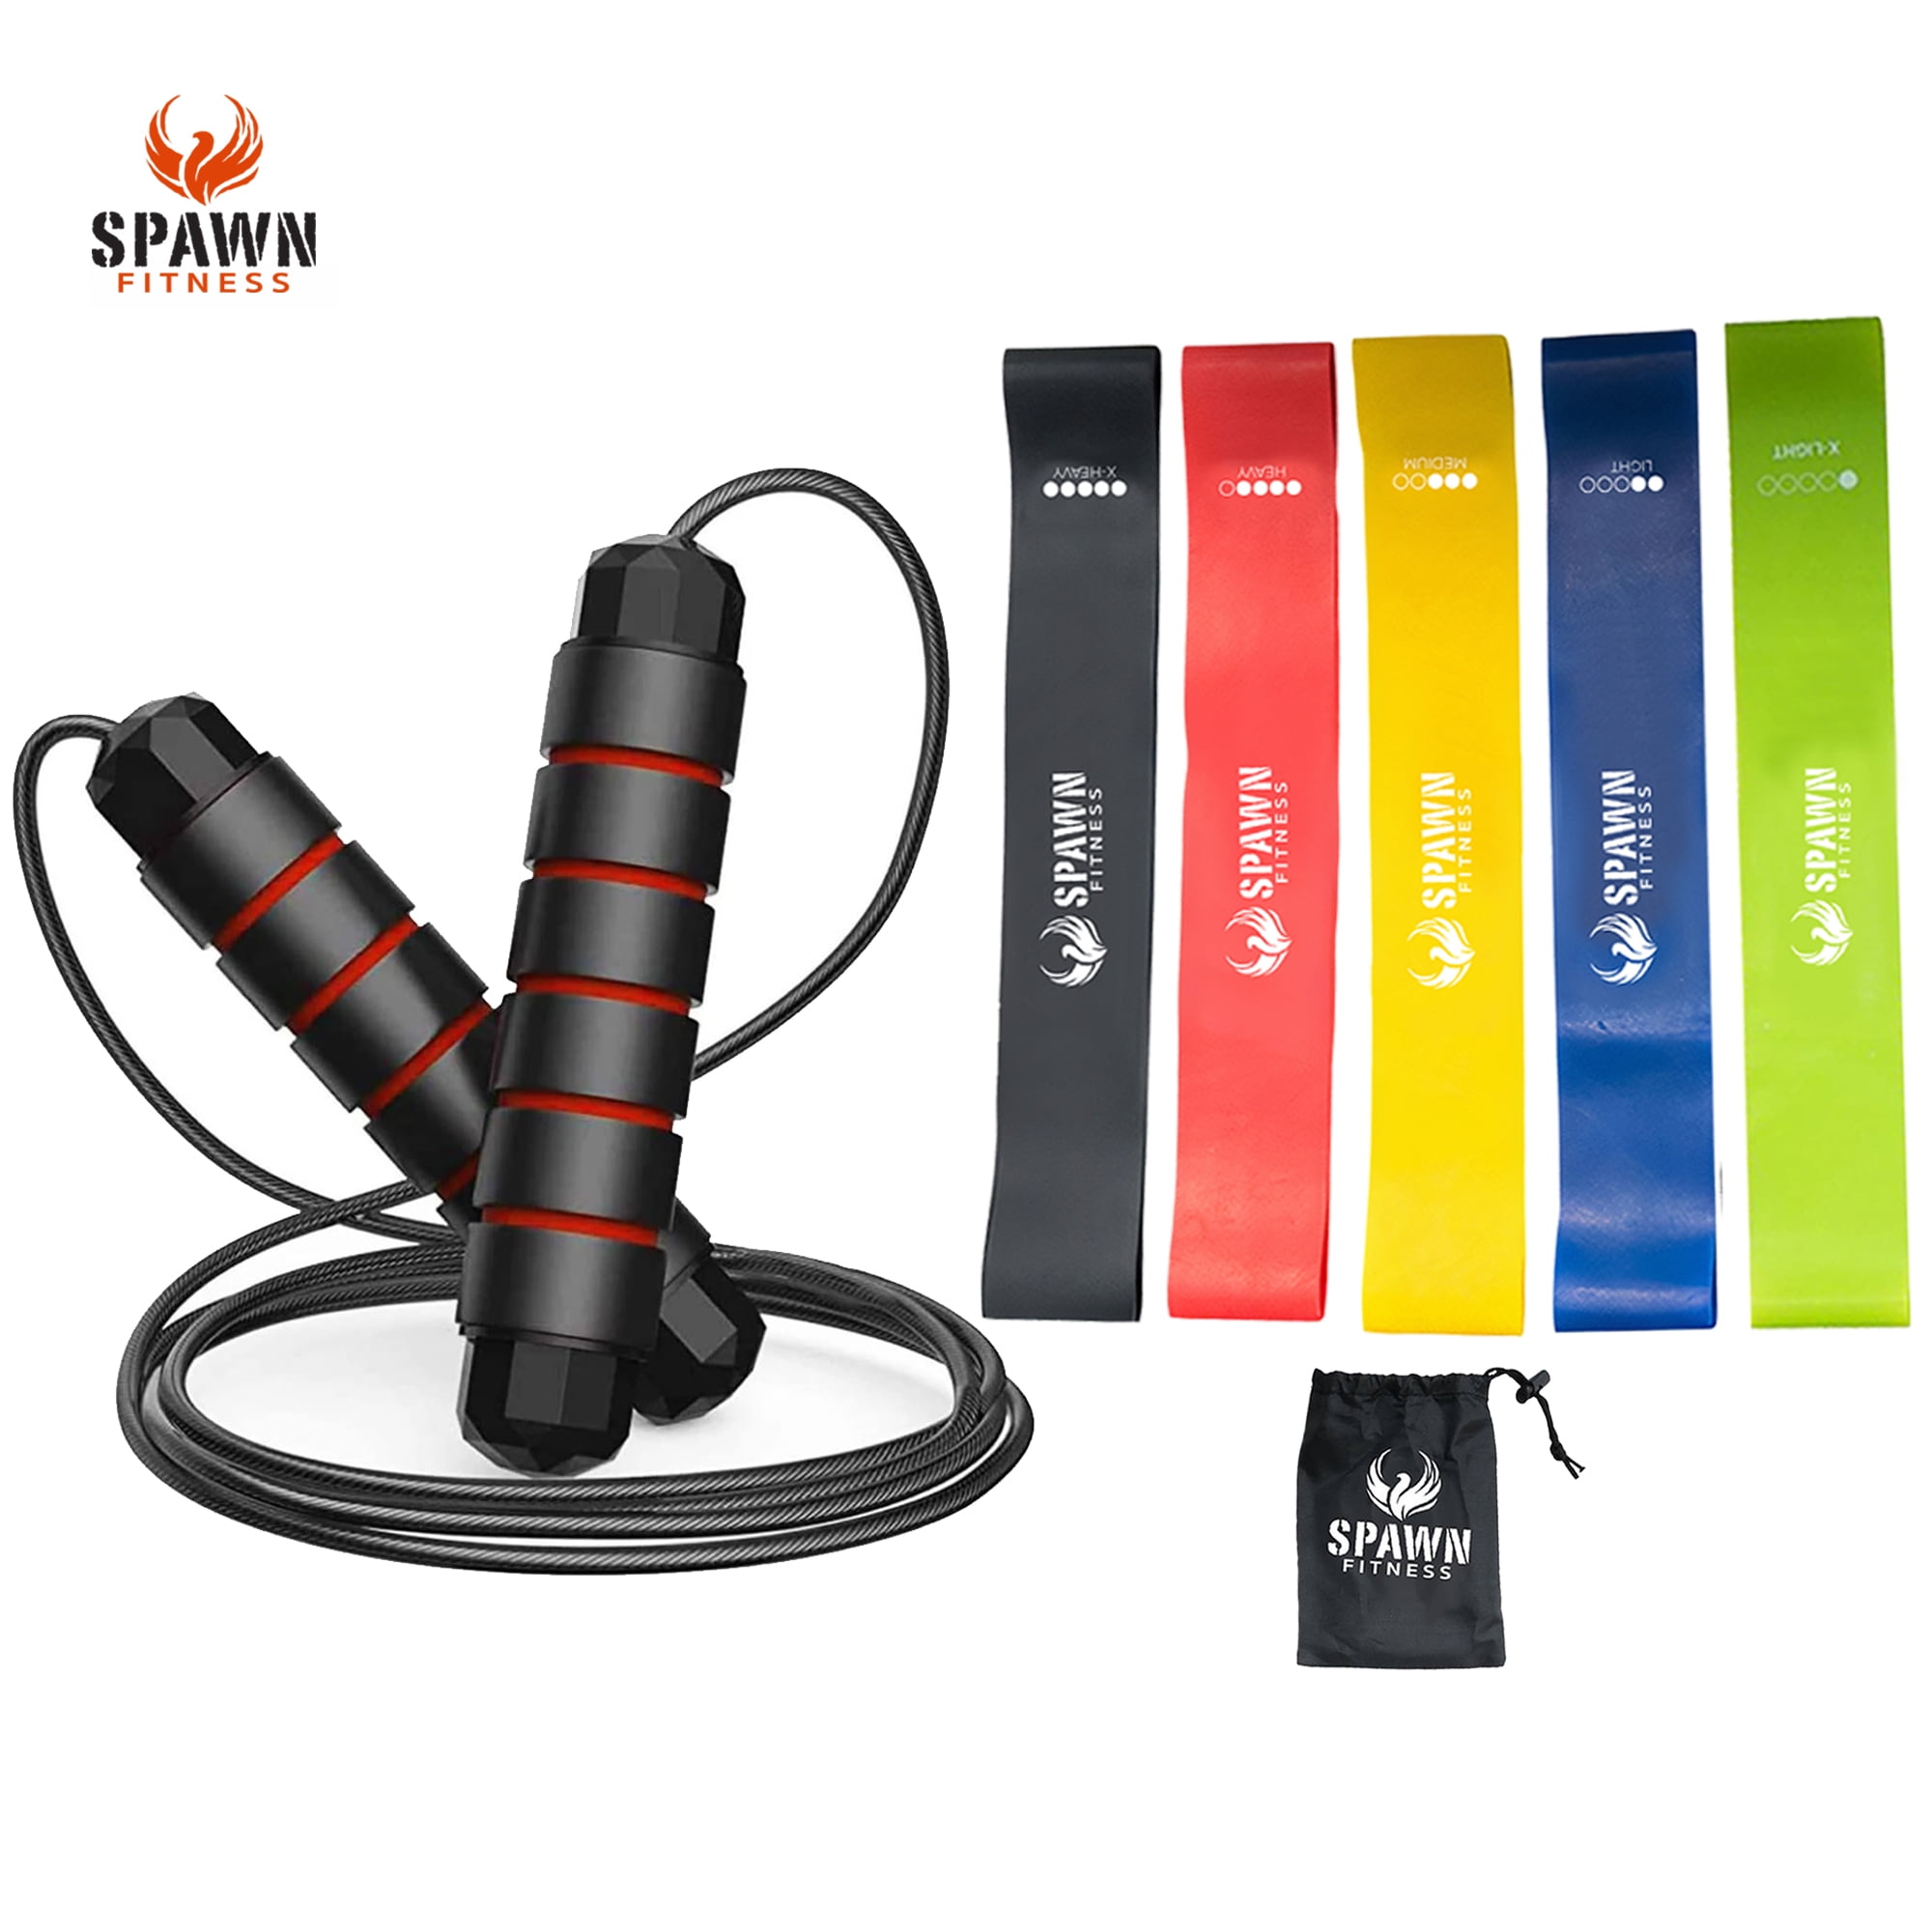 Skipping Rope for Fast Weight Loss Black Adjustable Cable Crossfit Rapid Ball Bearings & Anti-Slip Handles Rapid Ball Bearings & Anti-Slip Handles Skipping Rope for Fast Weight Loss & for Exercise Crossfit Cardio Rapide Jump Rope 